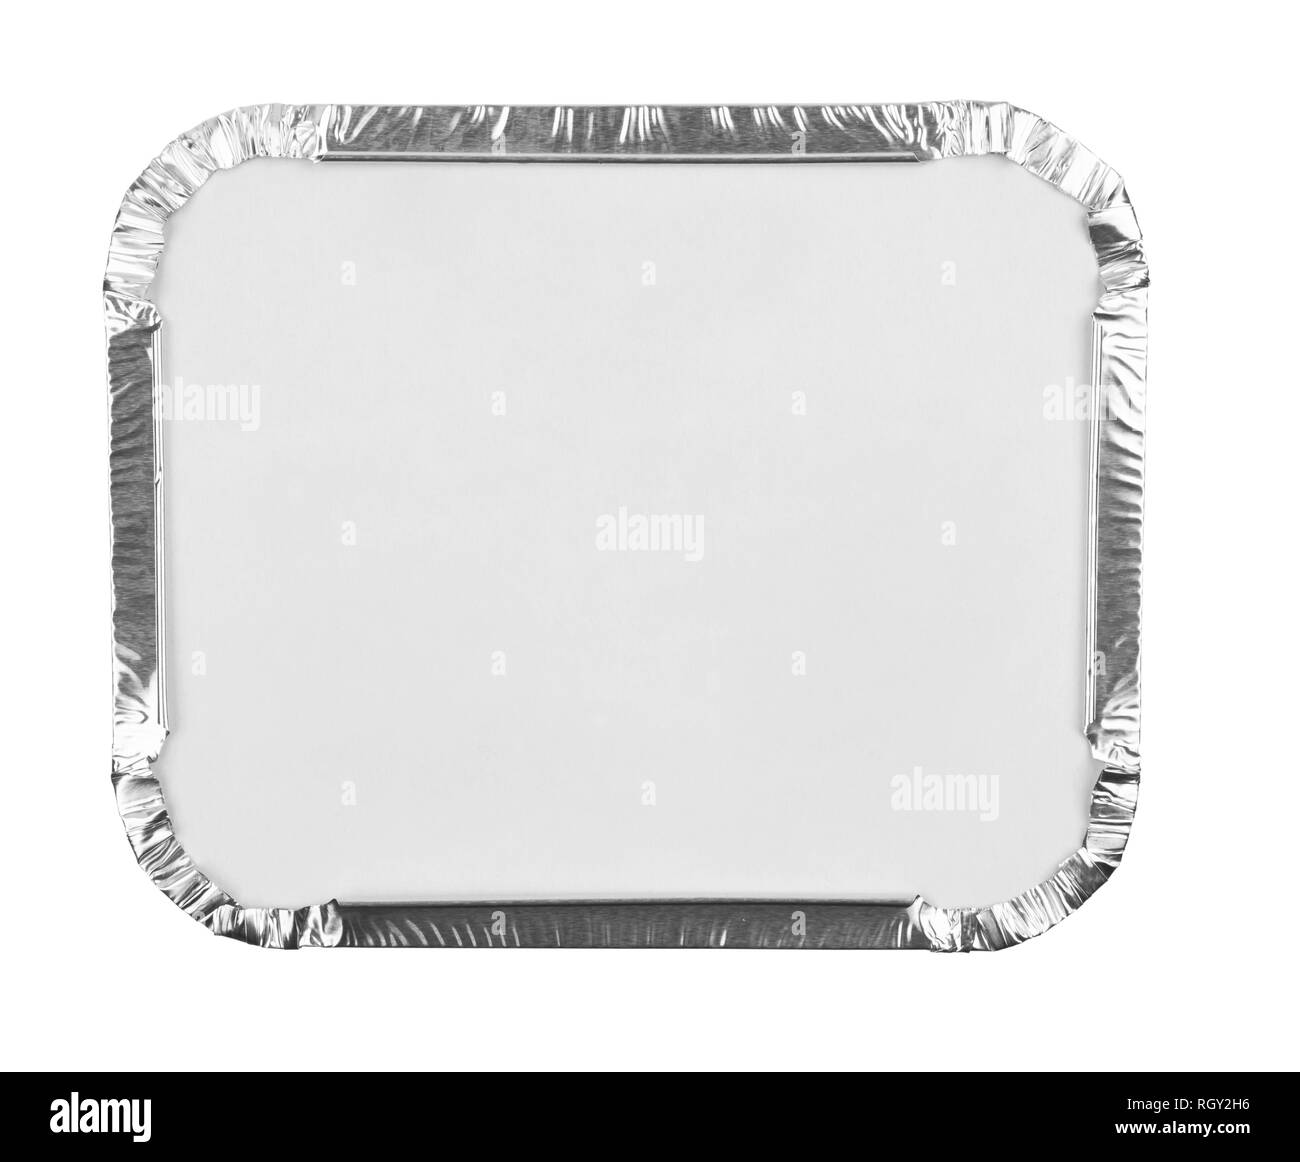 Foil trays for food on a white background Stock Photo